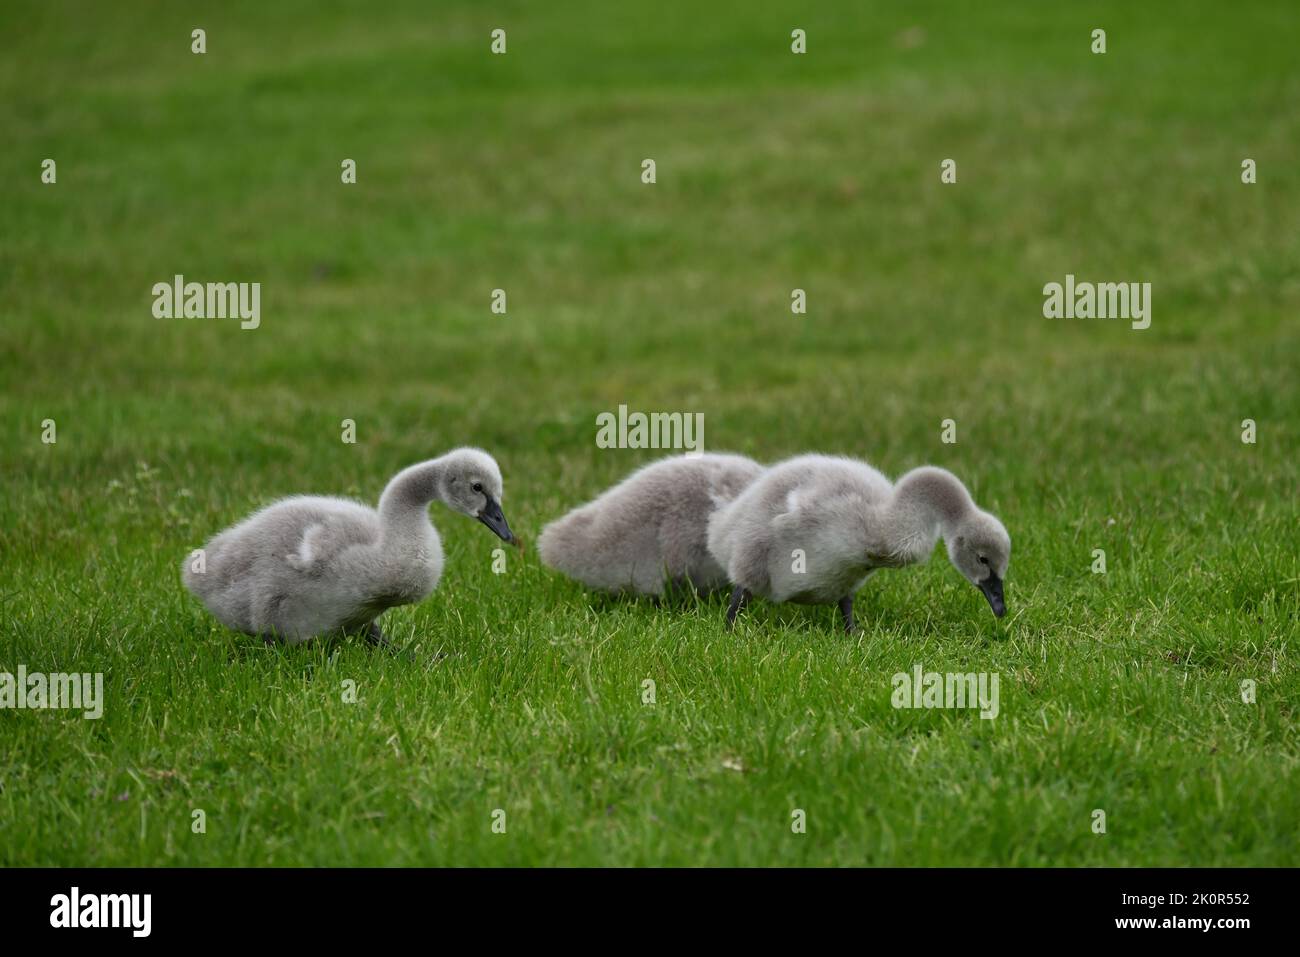 Side view of three black swan cygnets, one partially obscured, walking along a grassy area while looking for food Stock Photo